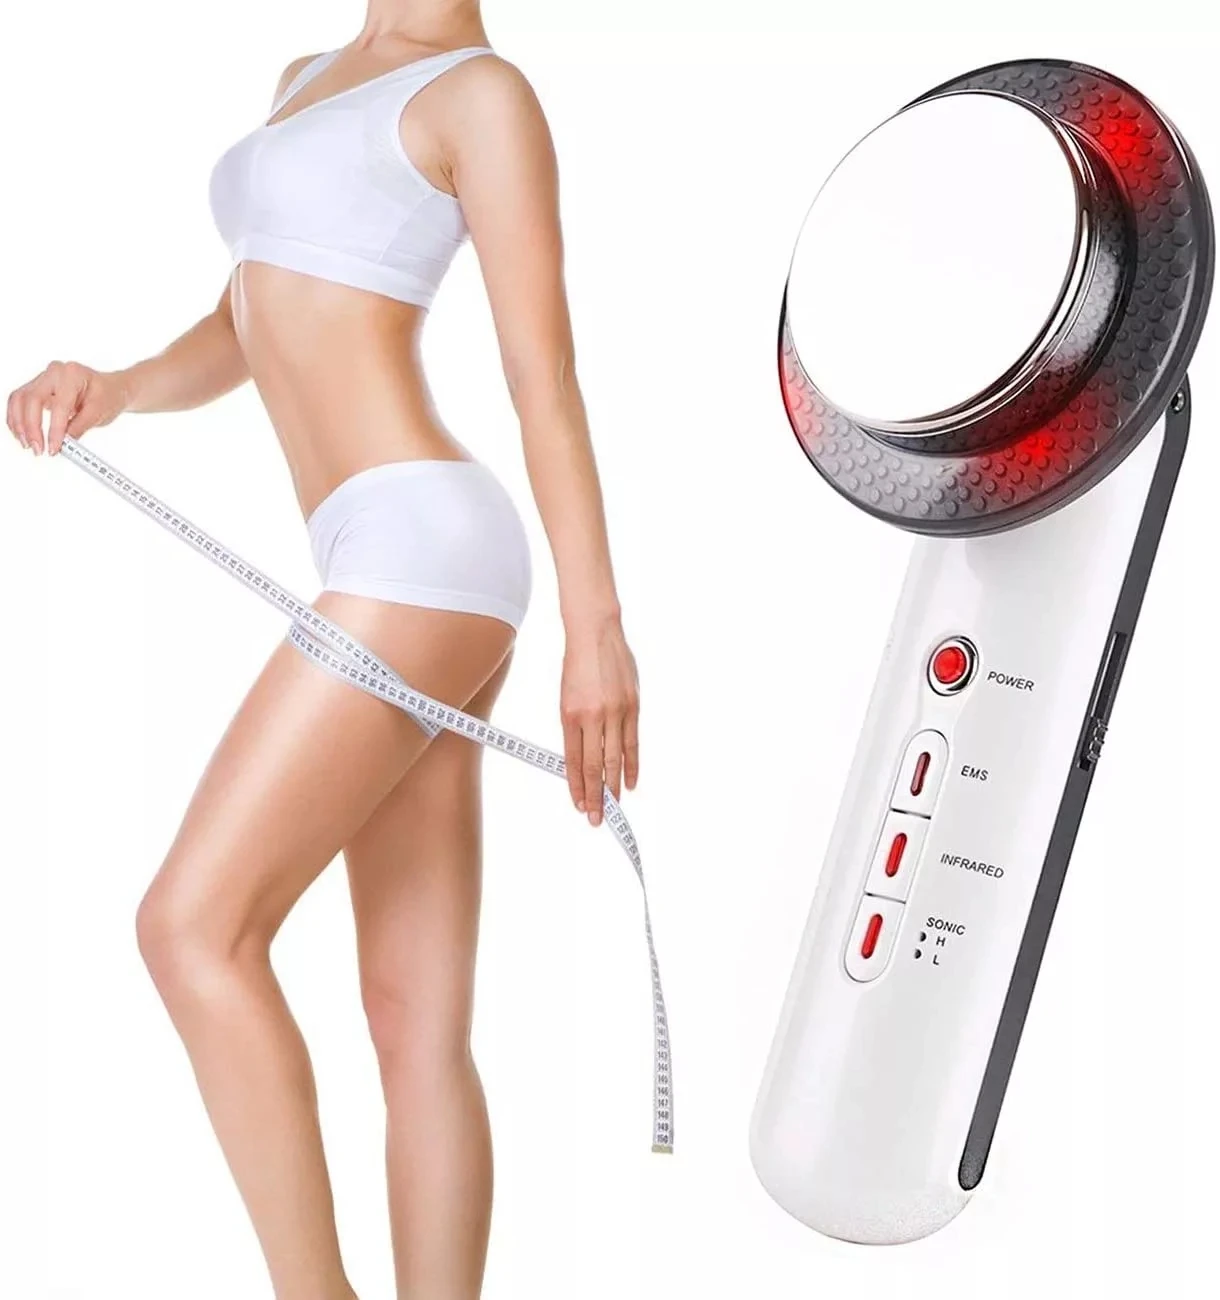 

Best Lose Weight Machine Body Slimmig Device Infrared Ultrasonic Therapy EMS Massager Fat Burner Machine